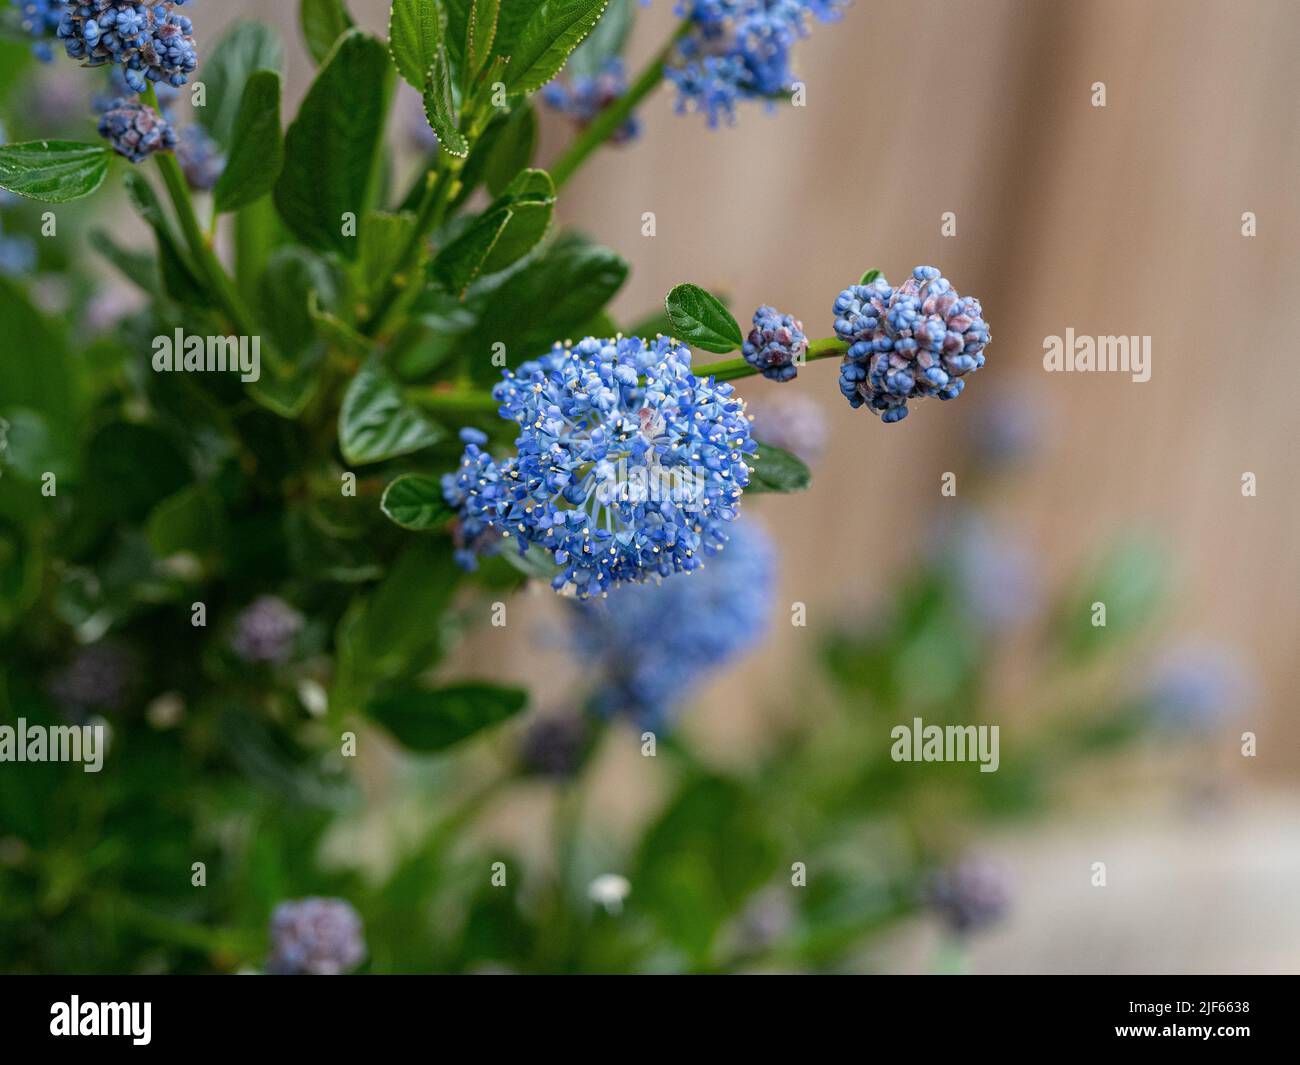 A close up of a sky blue flowers spike of Ceanothus impressus 'Victoria' Stock Photo